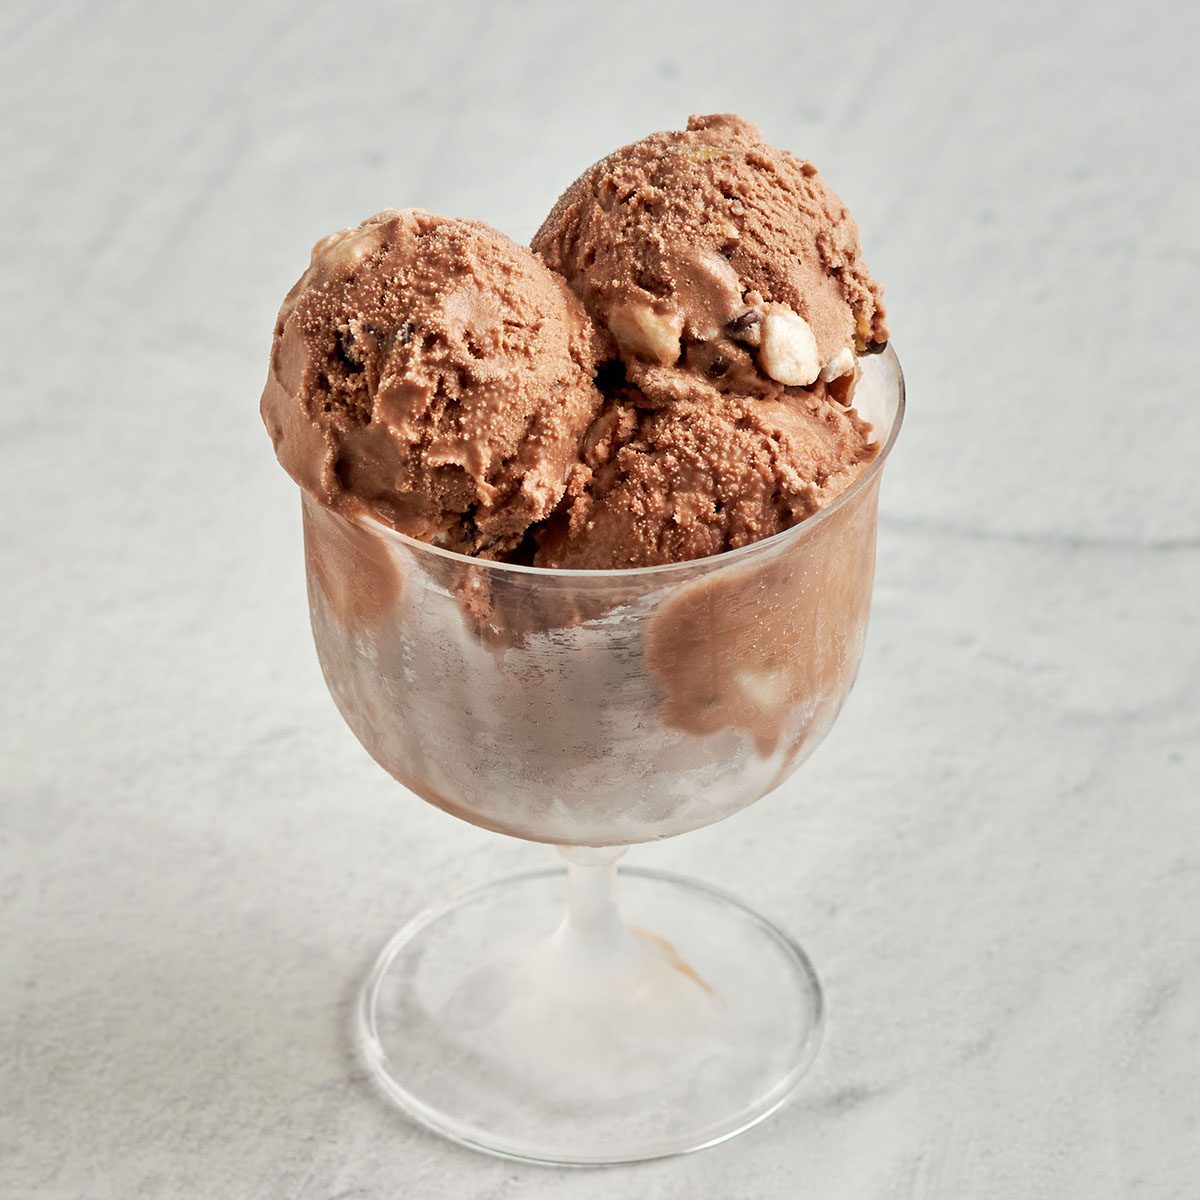 Taste of Home's rocky road ice cream recipe is easy to make and features ingredients you may already have on hand.